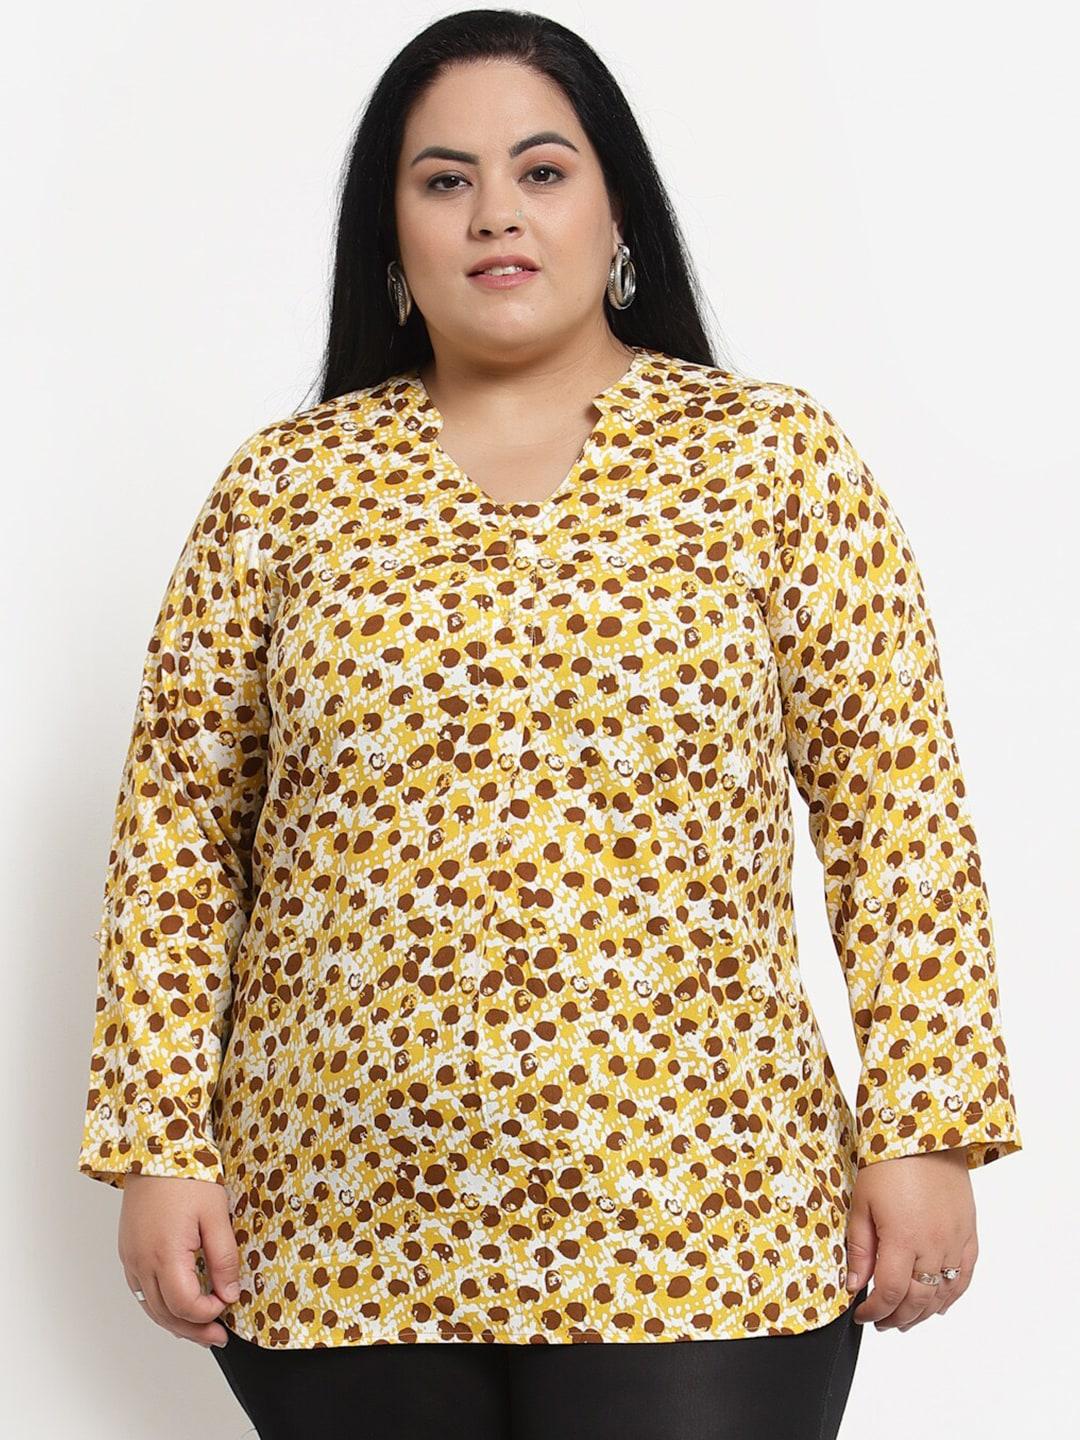 pluss women plus size yellow & brown abstract printed top